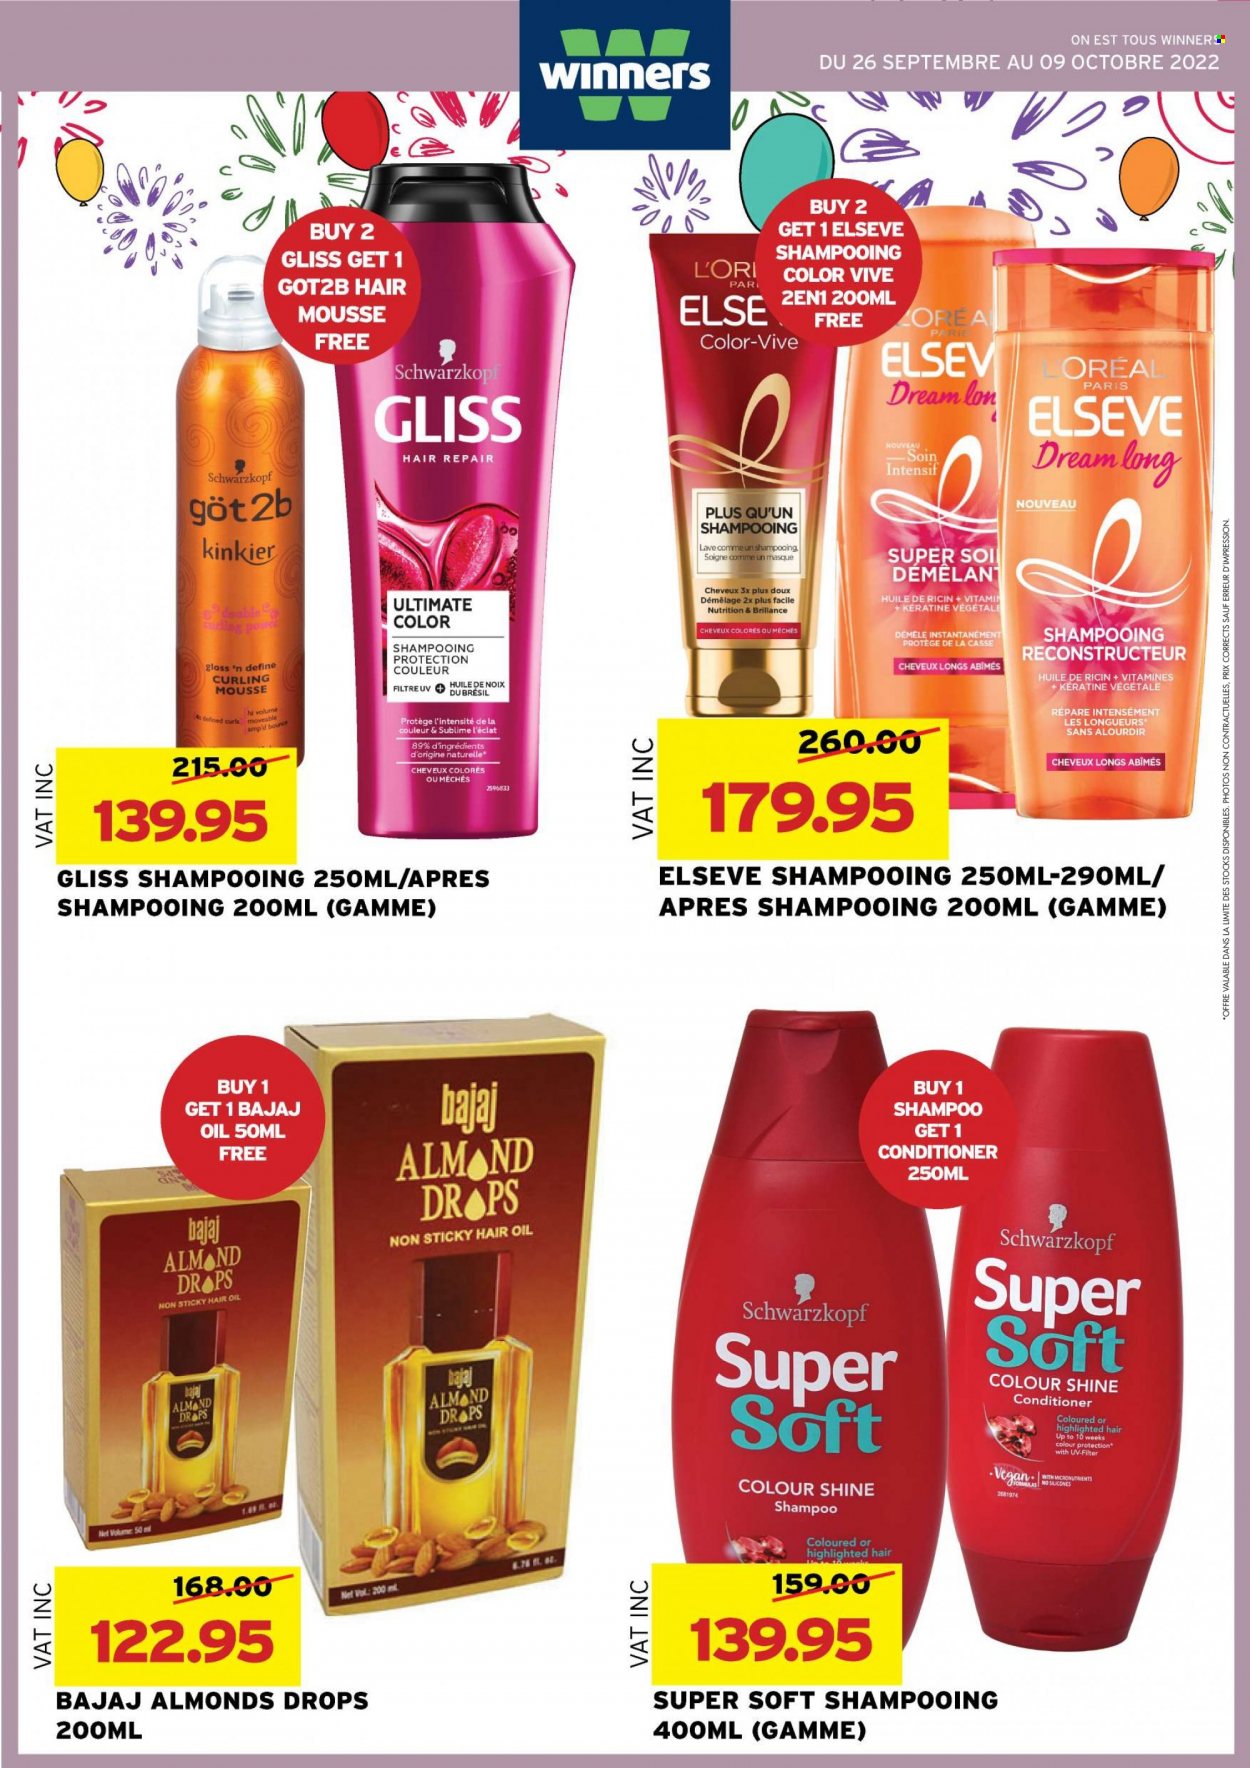 thumbnail - Winner's Catalogue - 26.09.2022 - 9.10.2022 - Sales products - oil, almonds, Gliss, conditioner, hair oil, Eclat, shampoo, Schwarzkopf. Page 37.